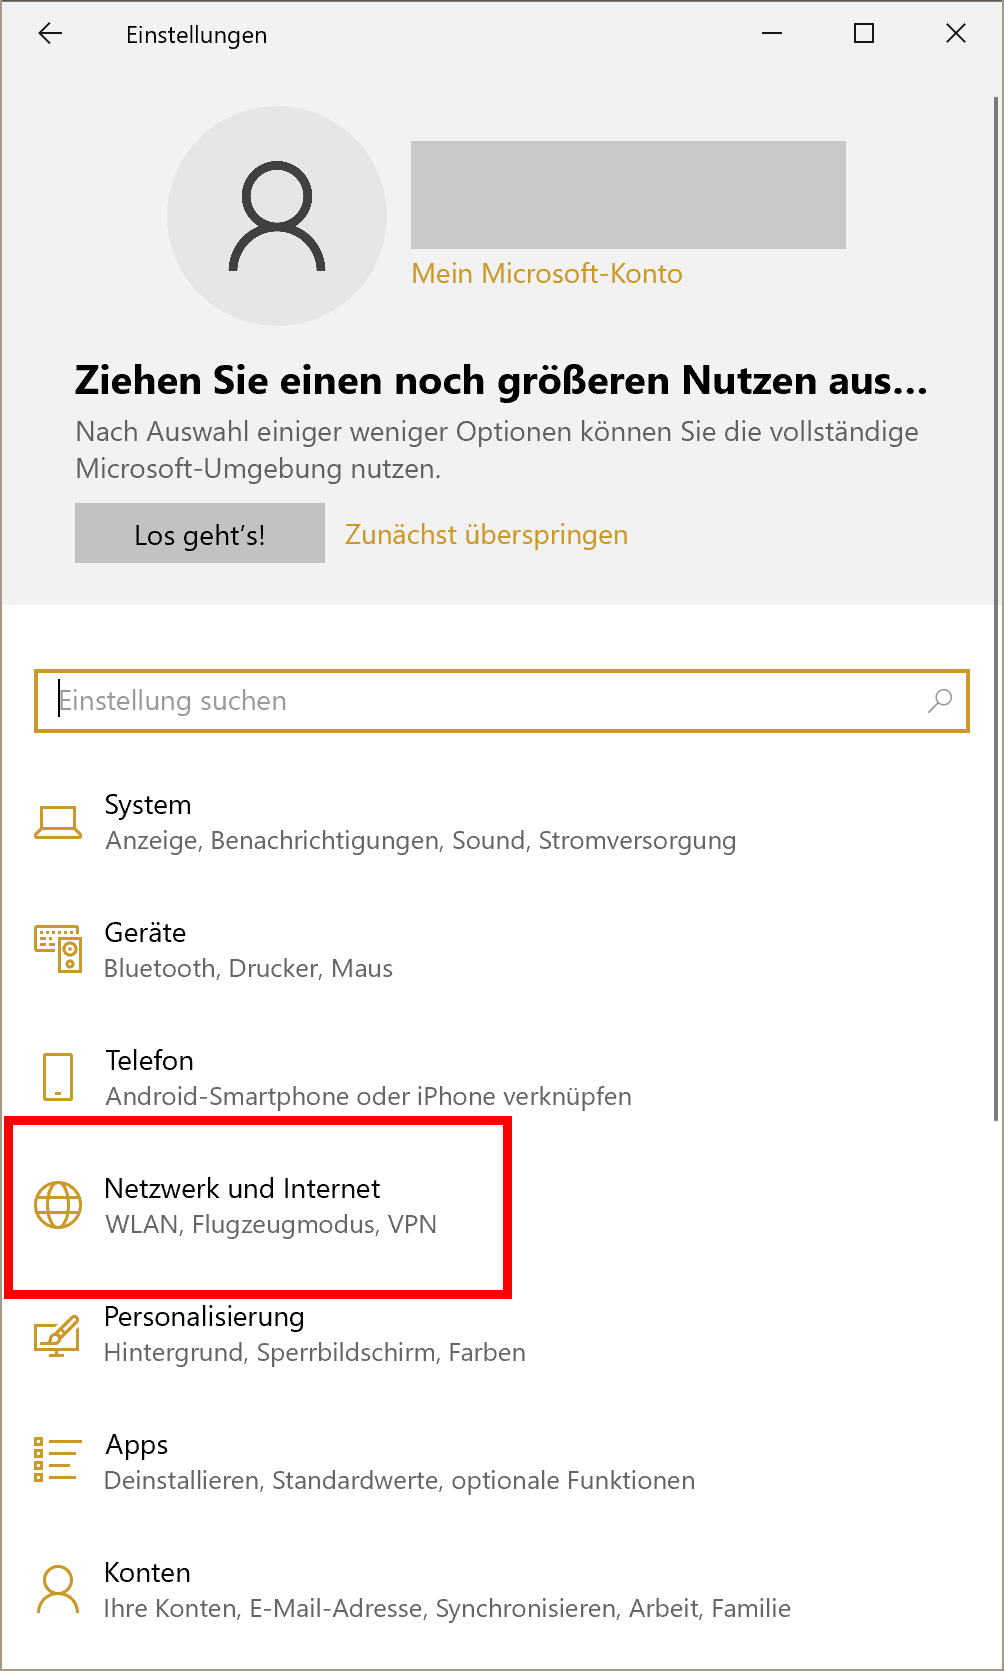 Screenshot of Windows Settings in German, with a profile photo, a search bar and then a menu with system, devices, telephone, networks and internet (this one is selected in a red rectangle) personalization, apps and accounts, all of them preceded by an icon 